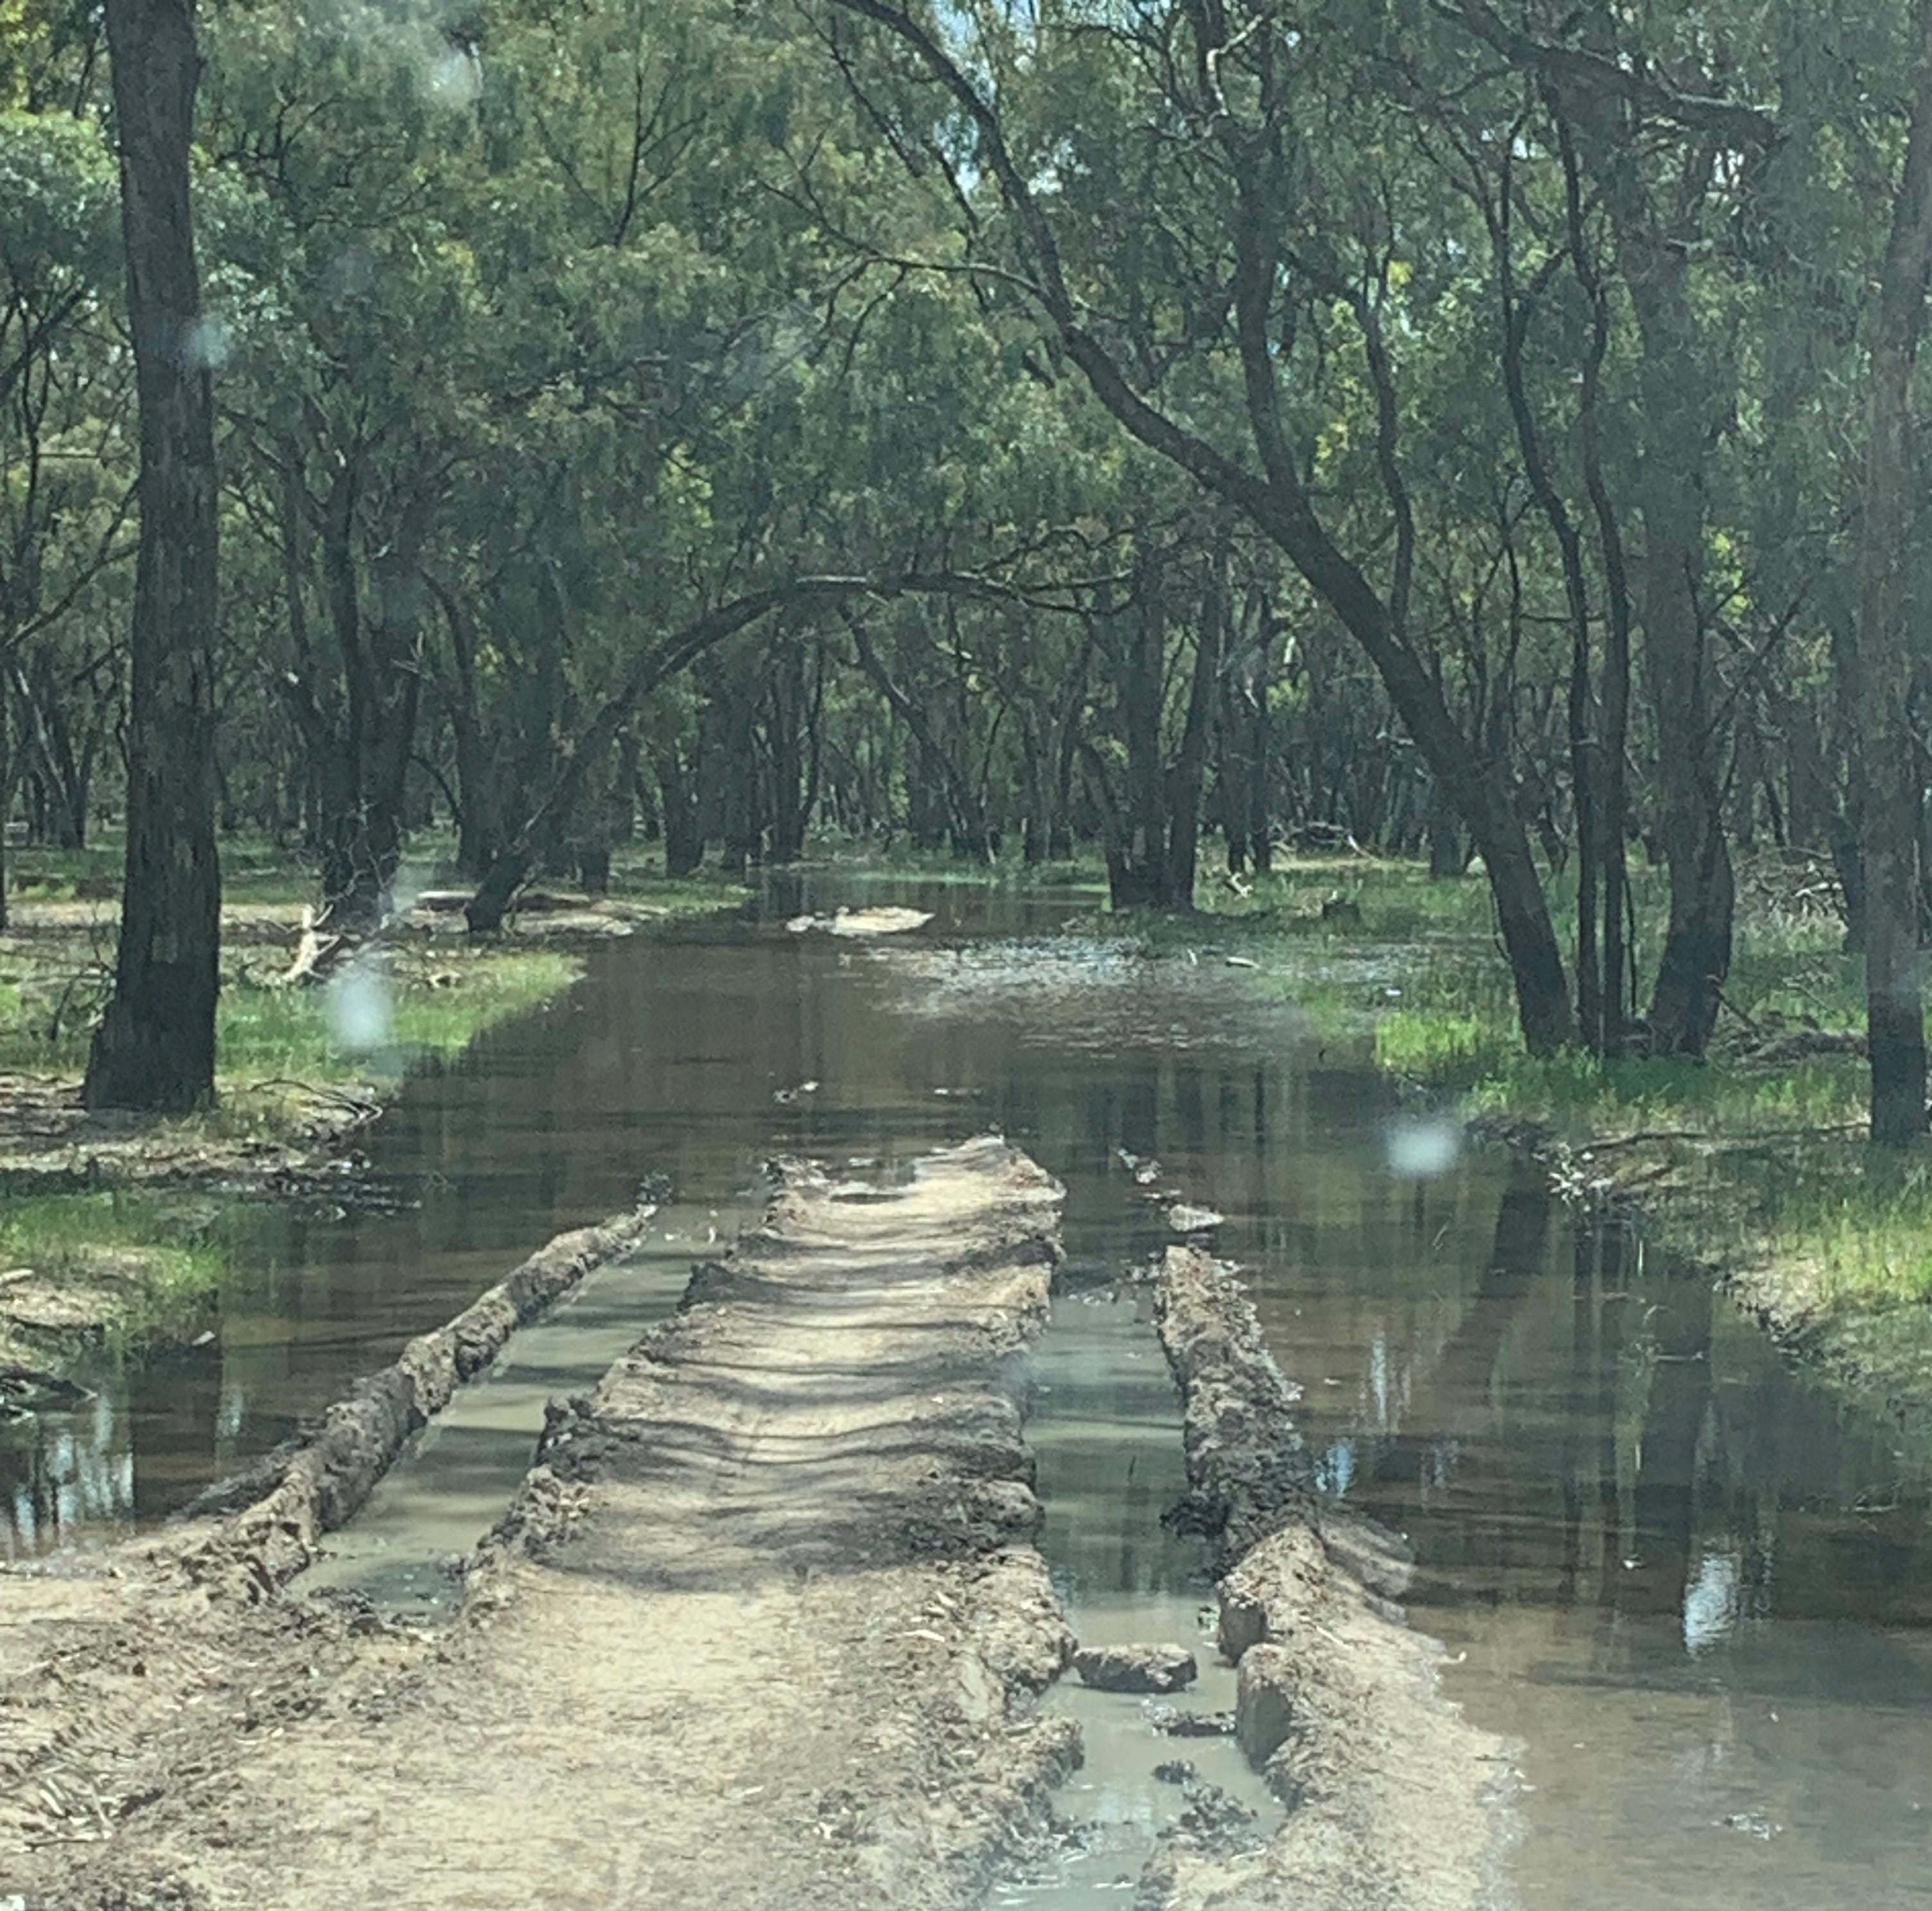 Large ruts in soil caused by illegal driving through fire management tracks at Gunbower National Park